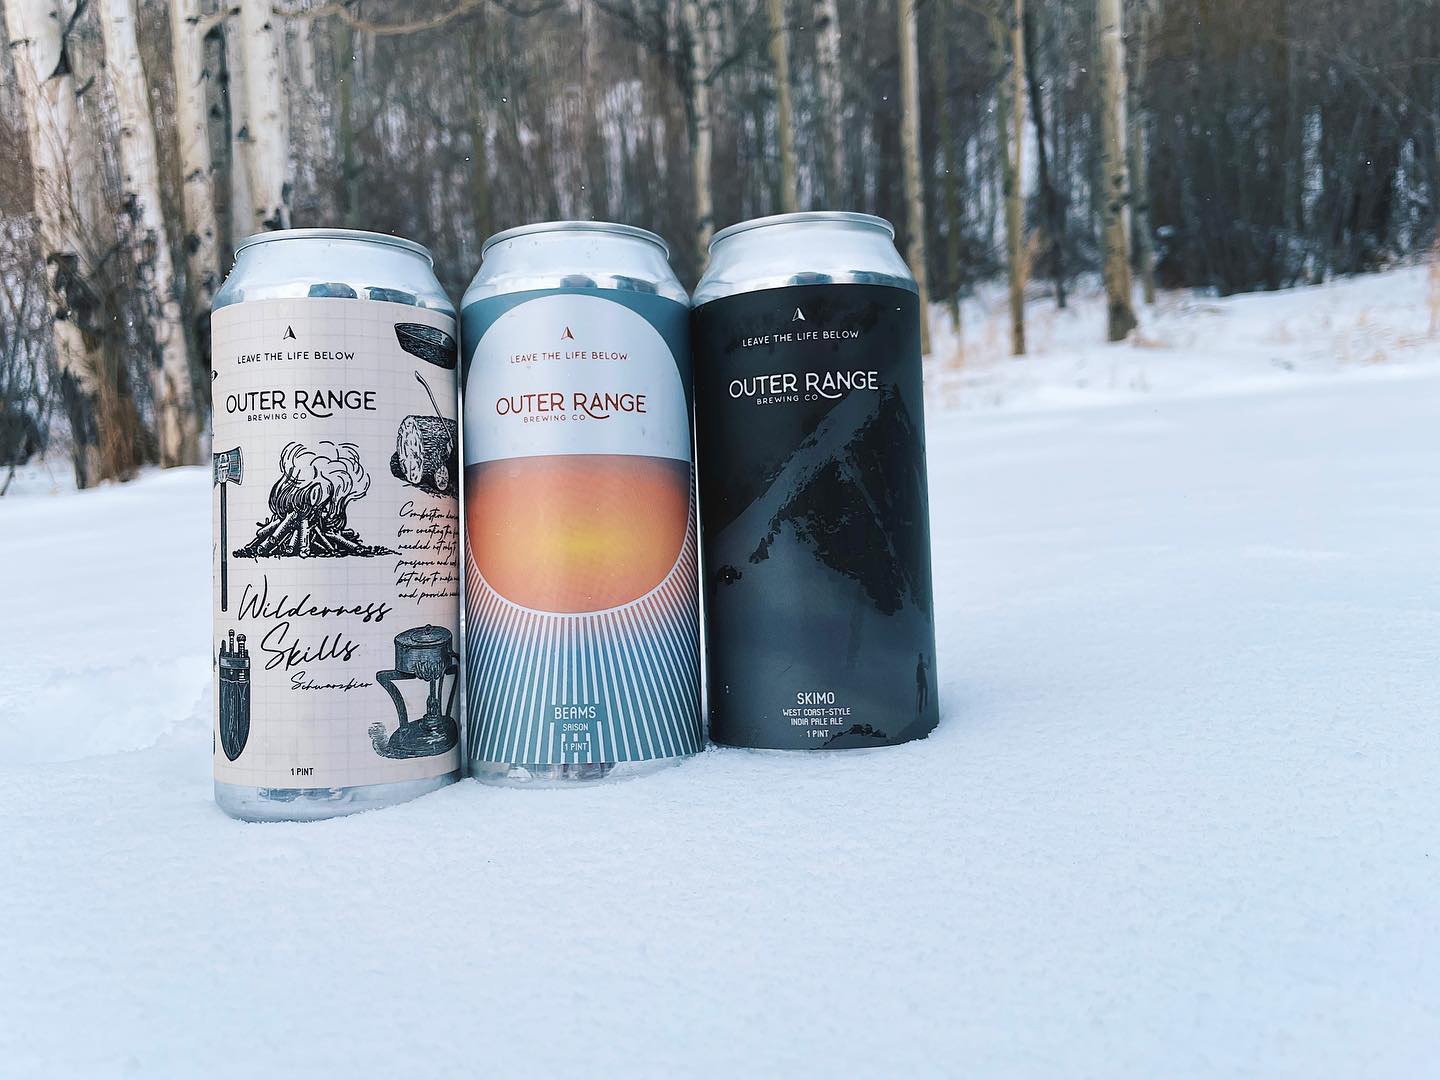 Outer Range Brewing cans in snow